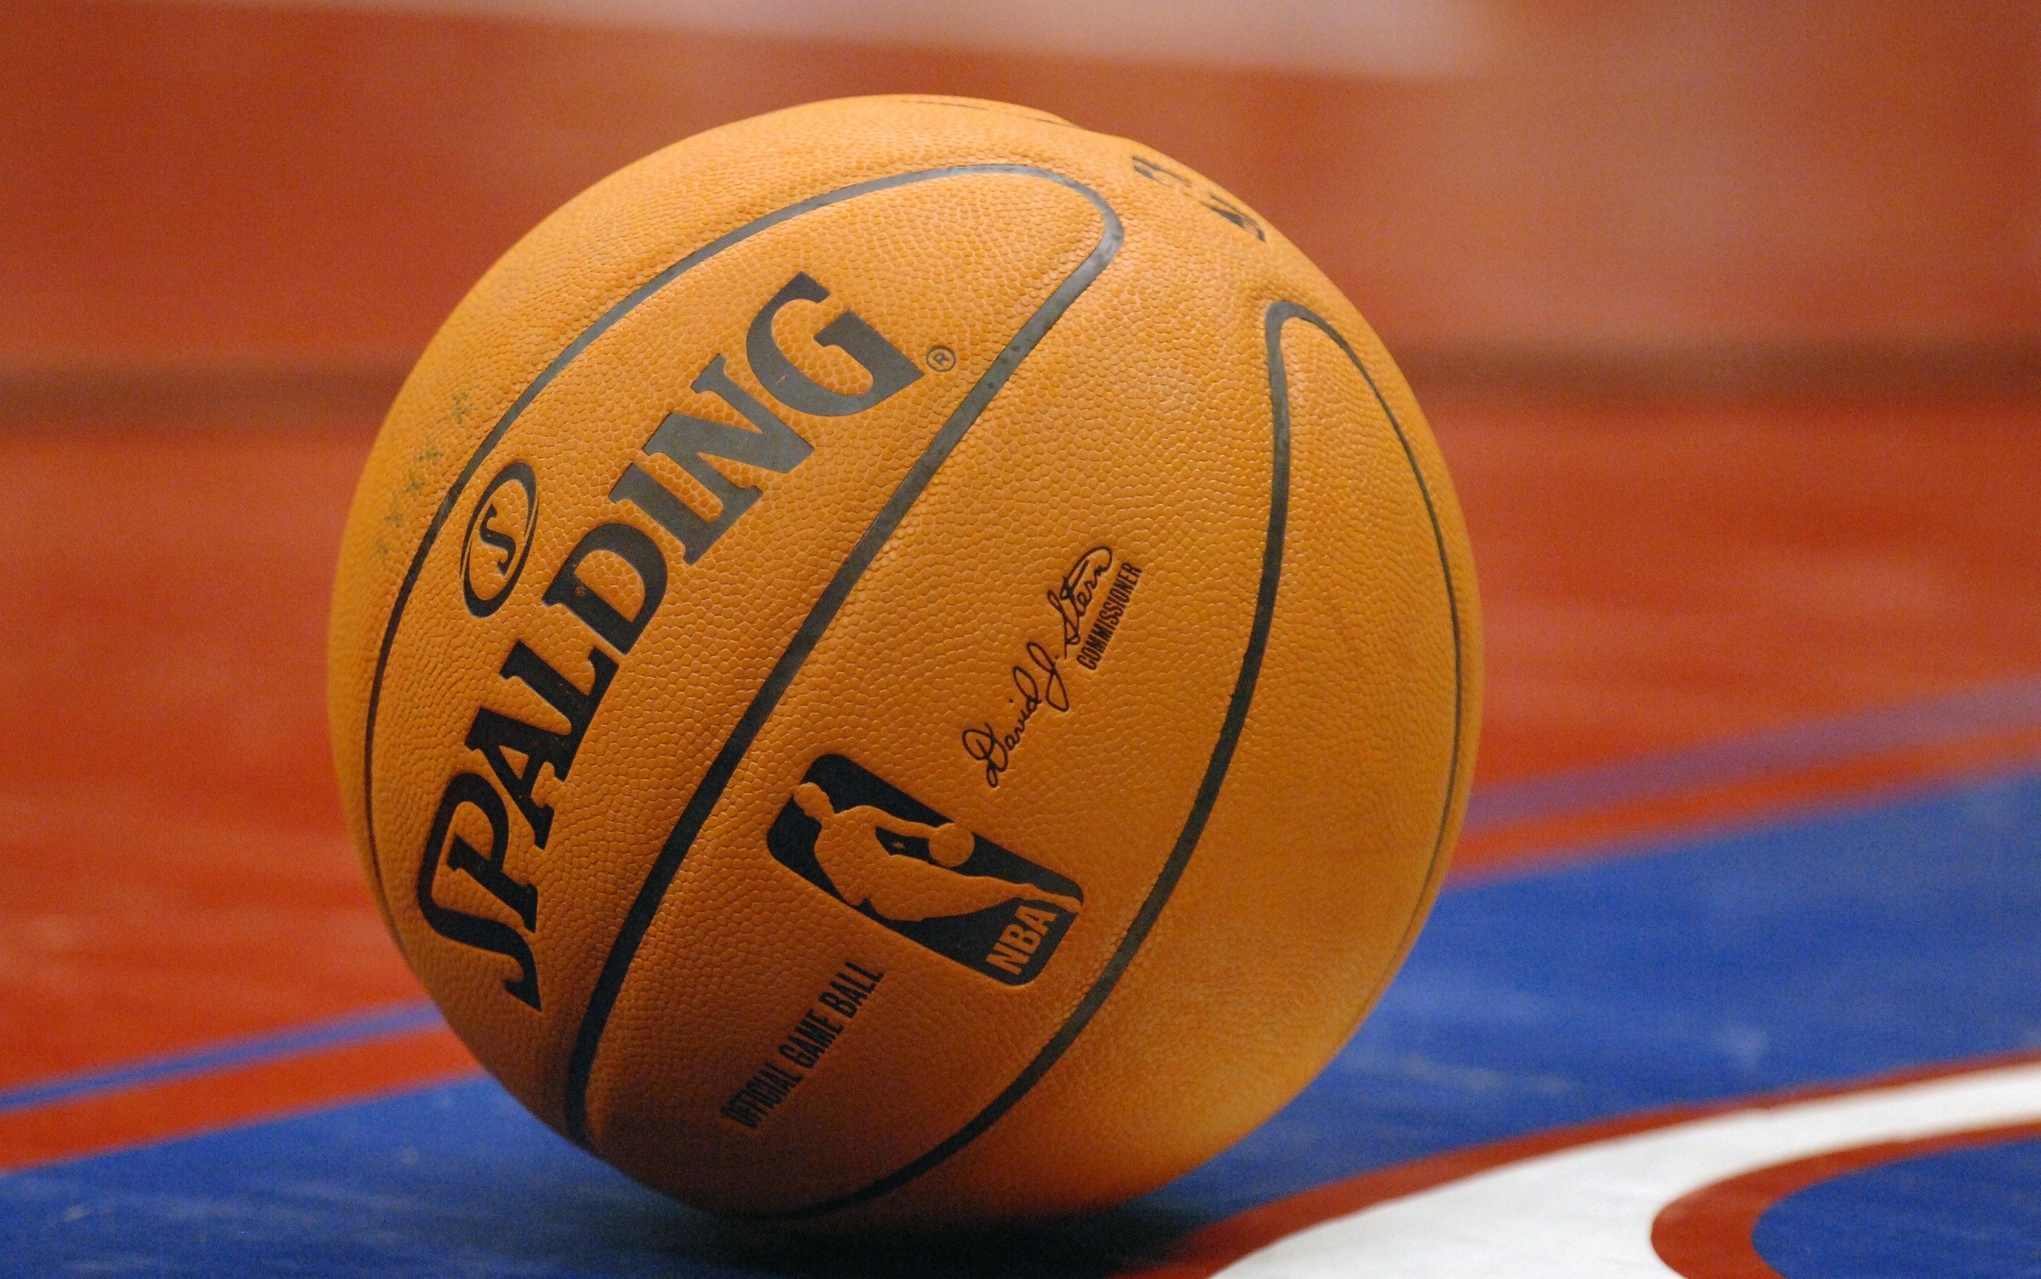 Spalding Remade The Original Basketball In Honor Of The NBA Finals